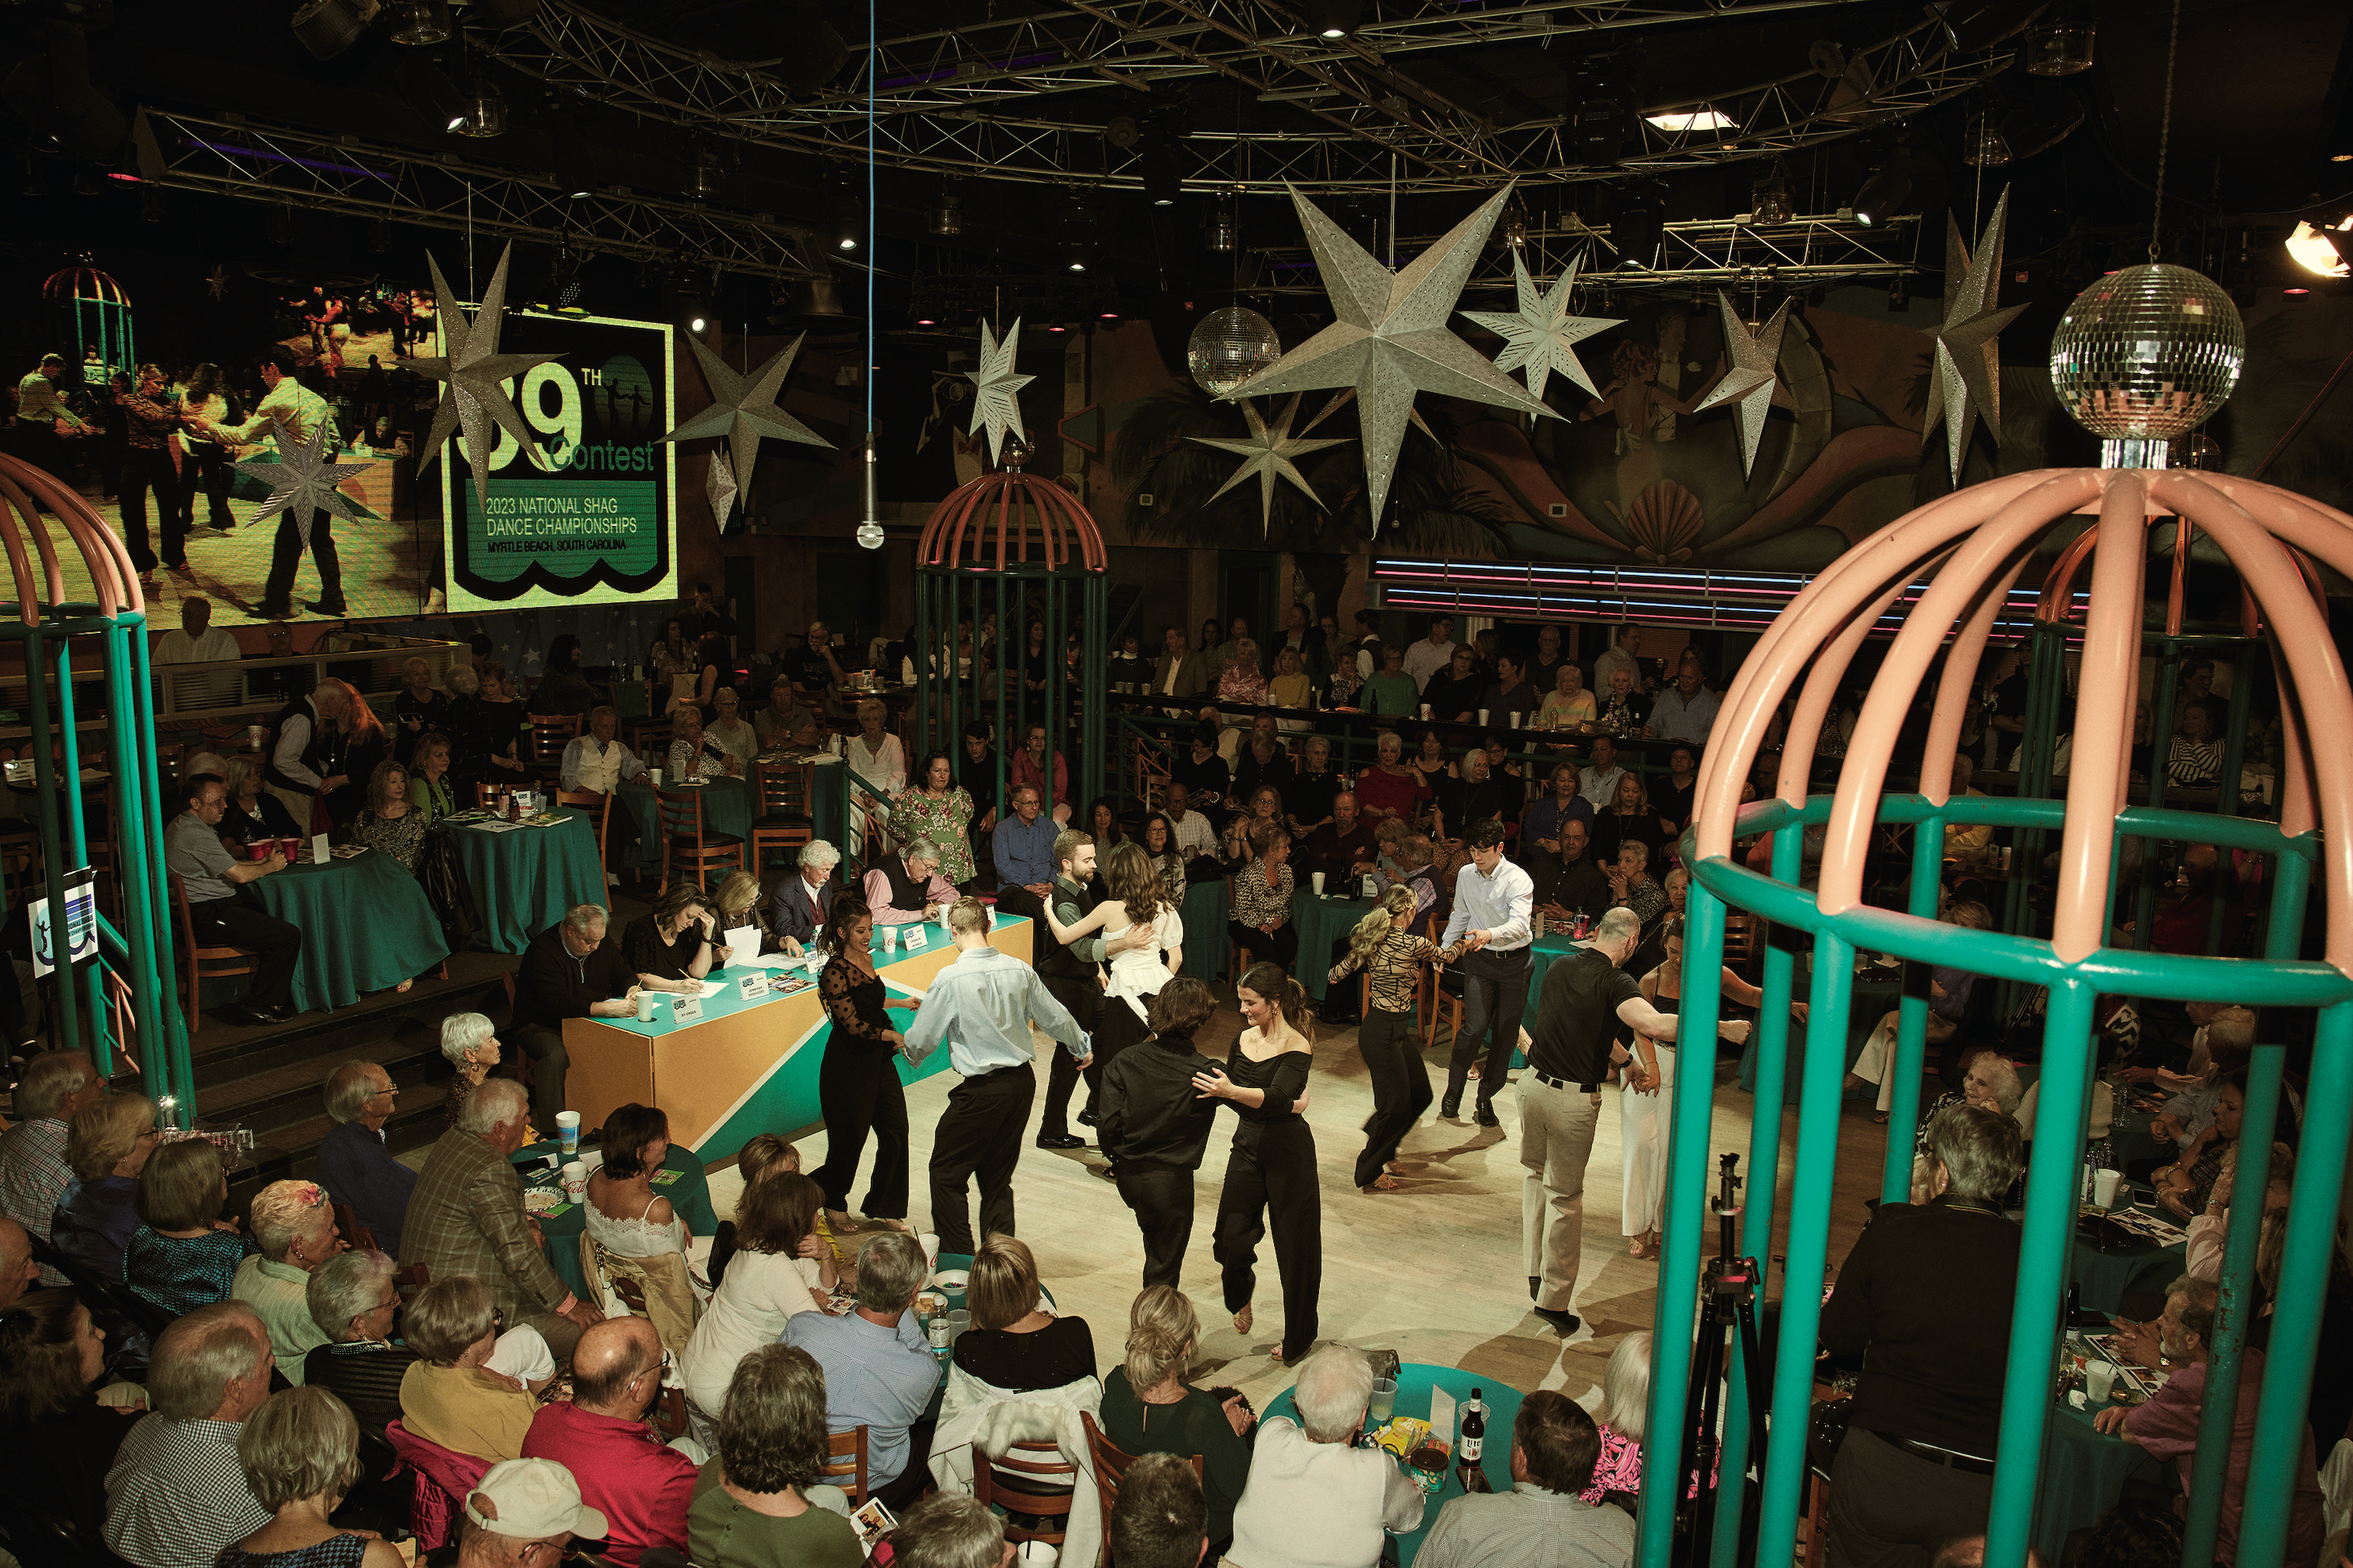 A dancing competition in a room with dancers on the floor; paper stars hang above the floor